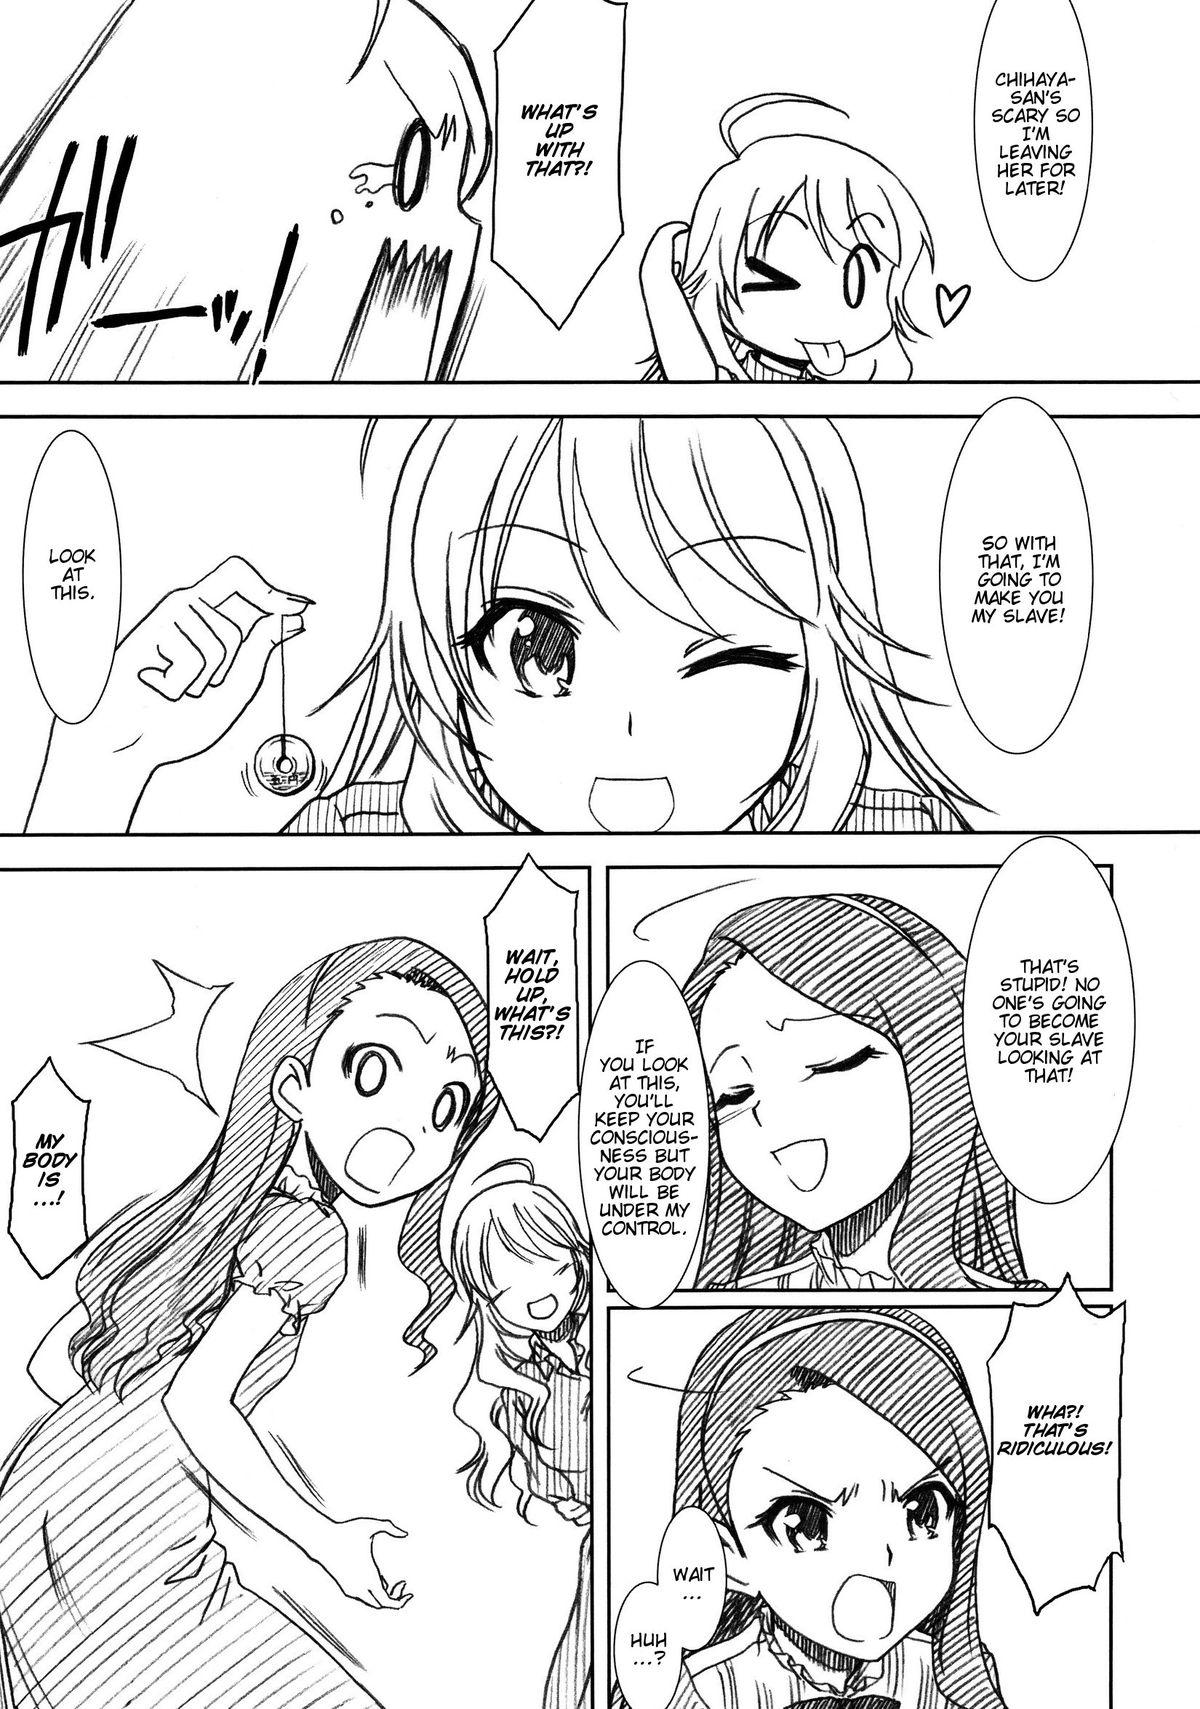 Toys MASTERY M@STERS - The idolmaster Babes - Page 10